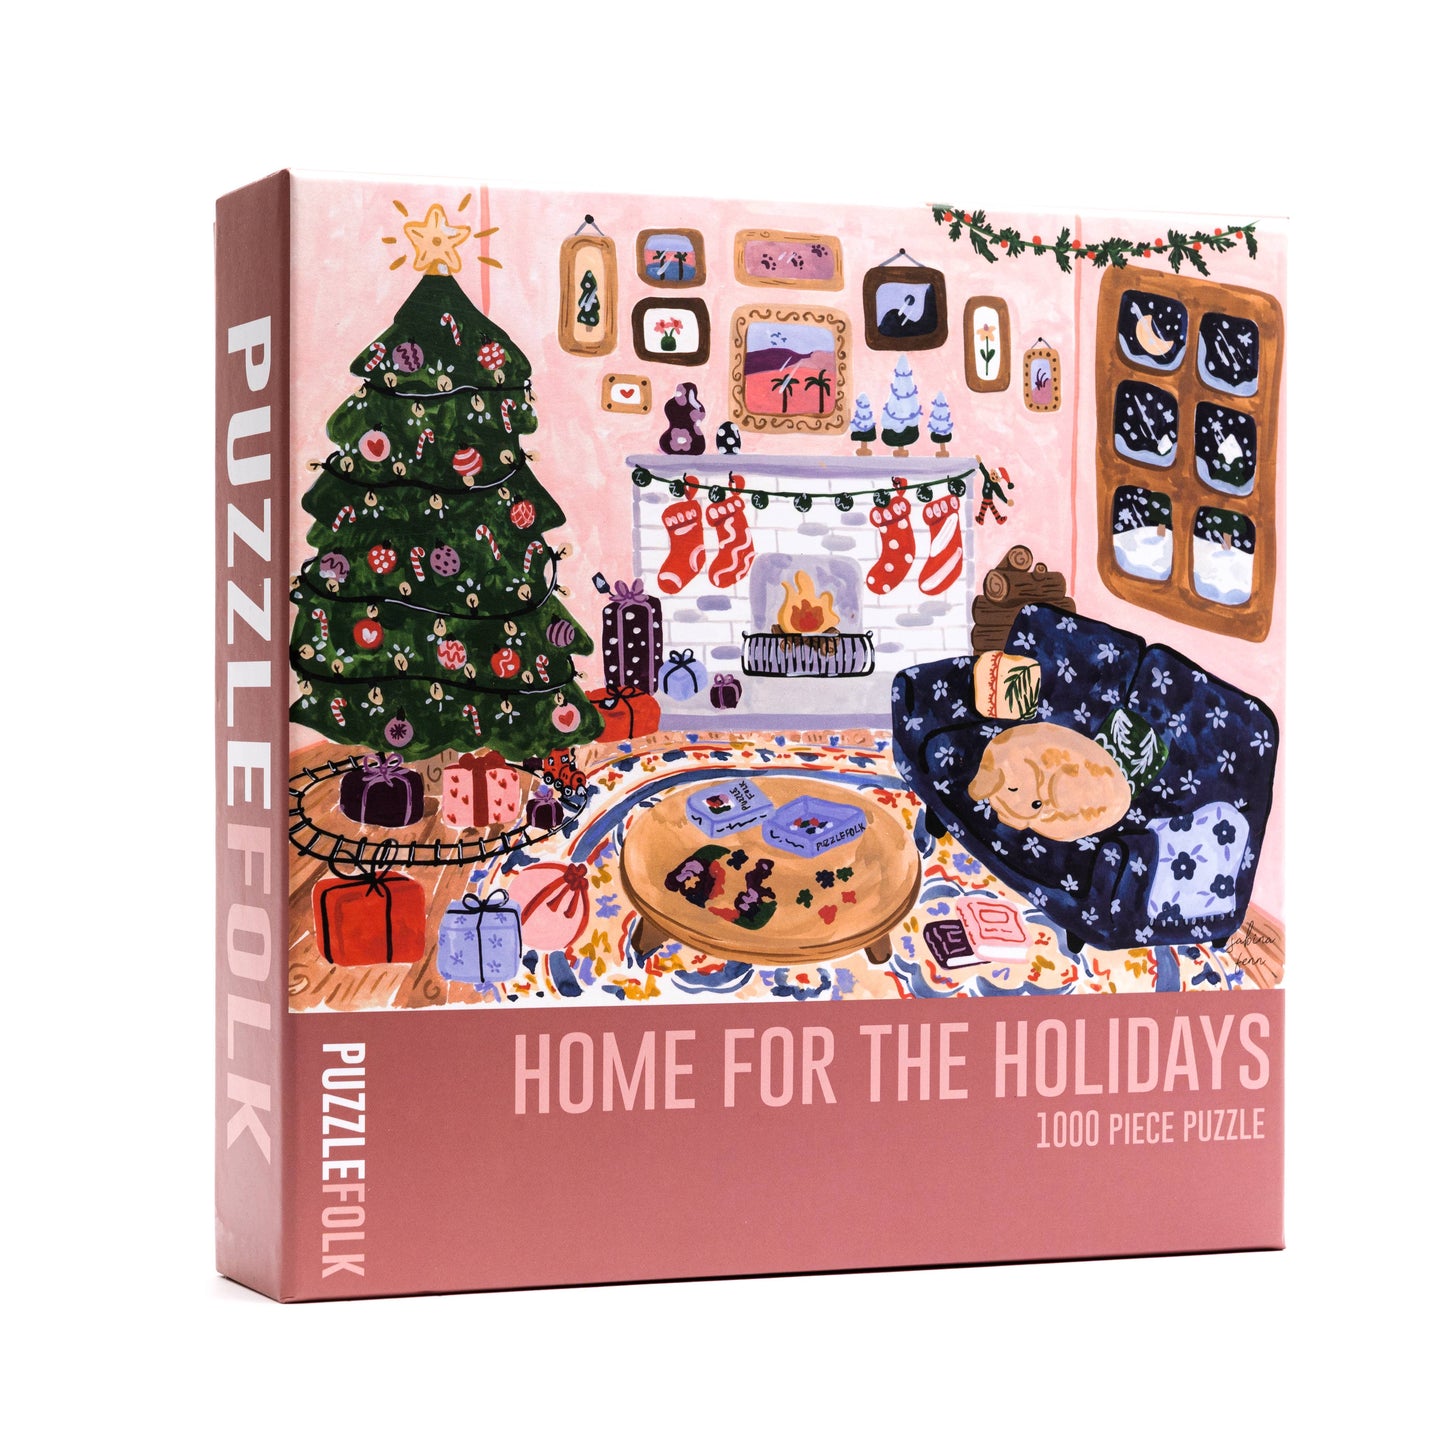 Home for the Holidays 1000 Piece Christmas Puzzle